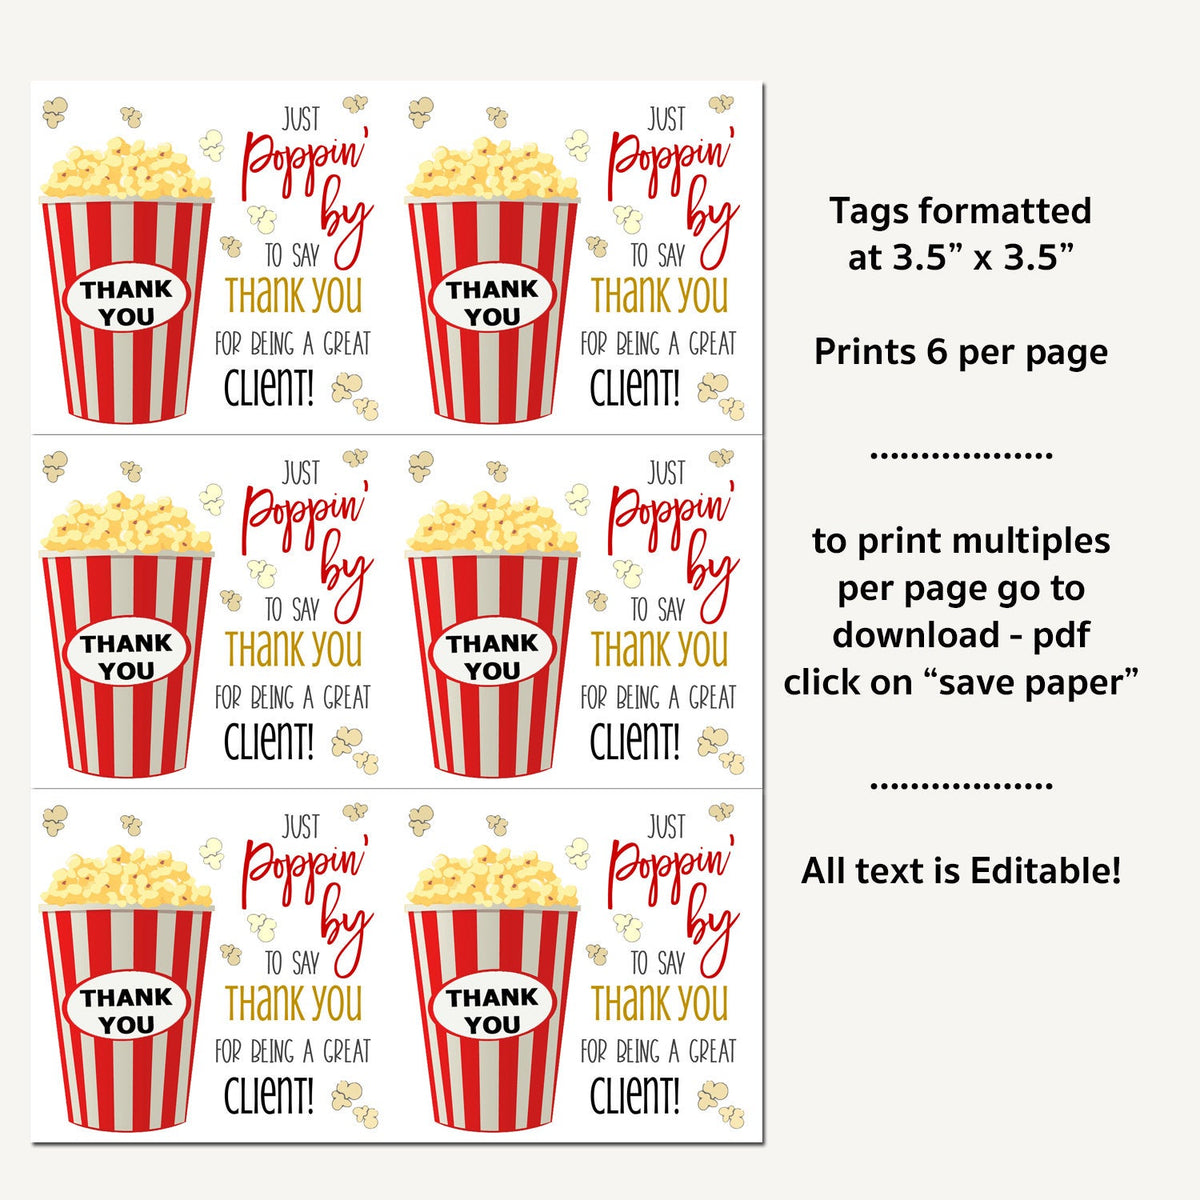 realtor-popcorn-tag-open-house-real-estate-thank-you-tag-tidylady-printables